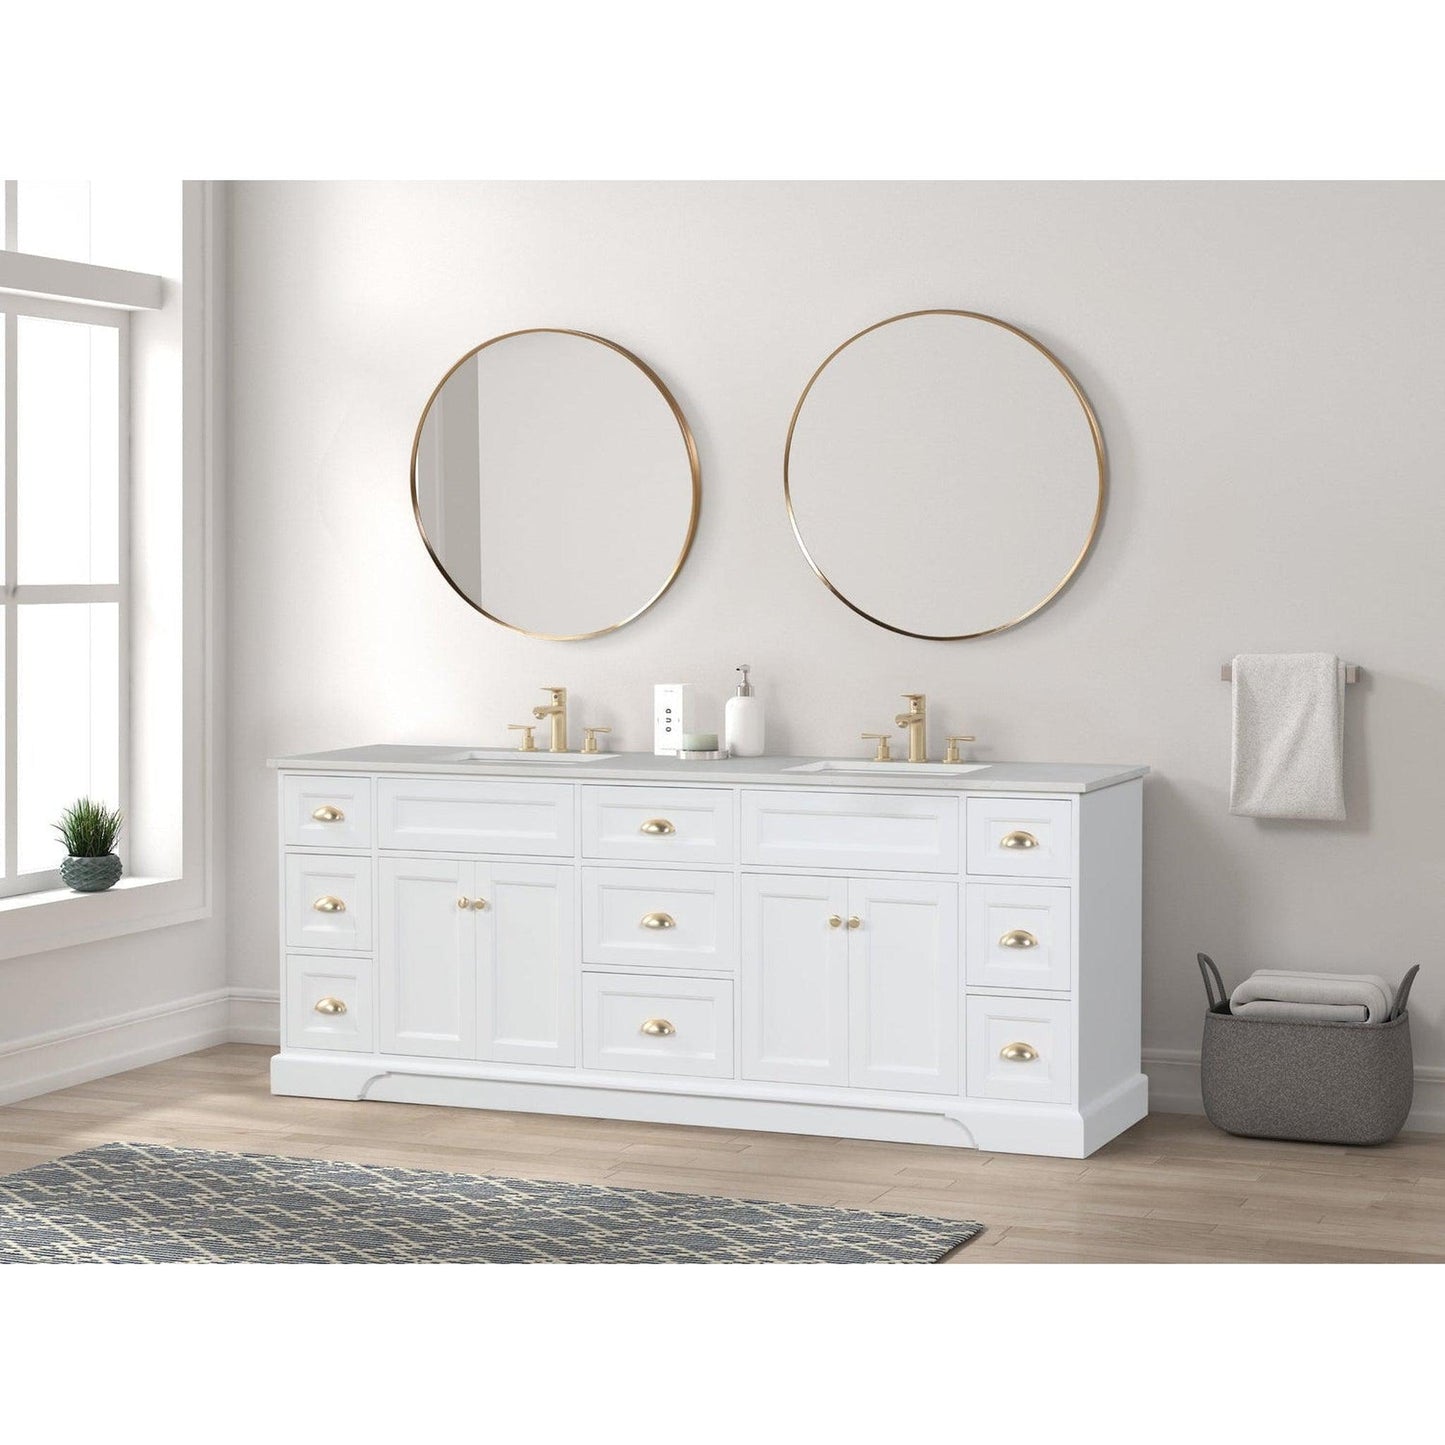 Eviva Epic 84" x 34" White Freestanding Bathroom Vanity With Brushed Gold Hardware and Quartz Countertop With Double Undermount Sink